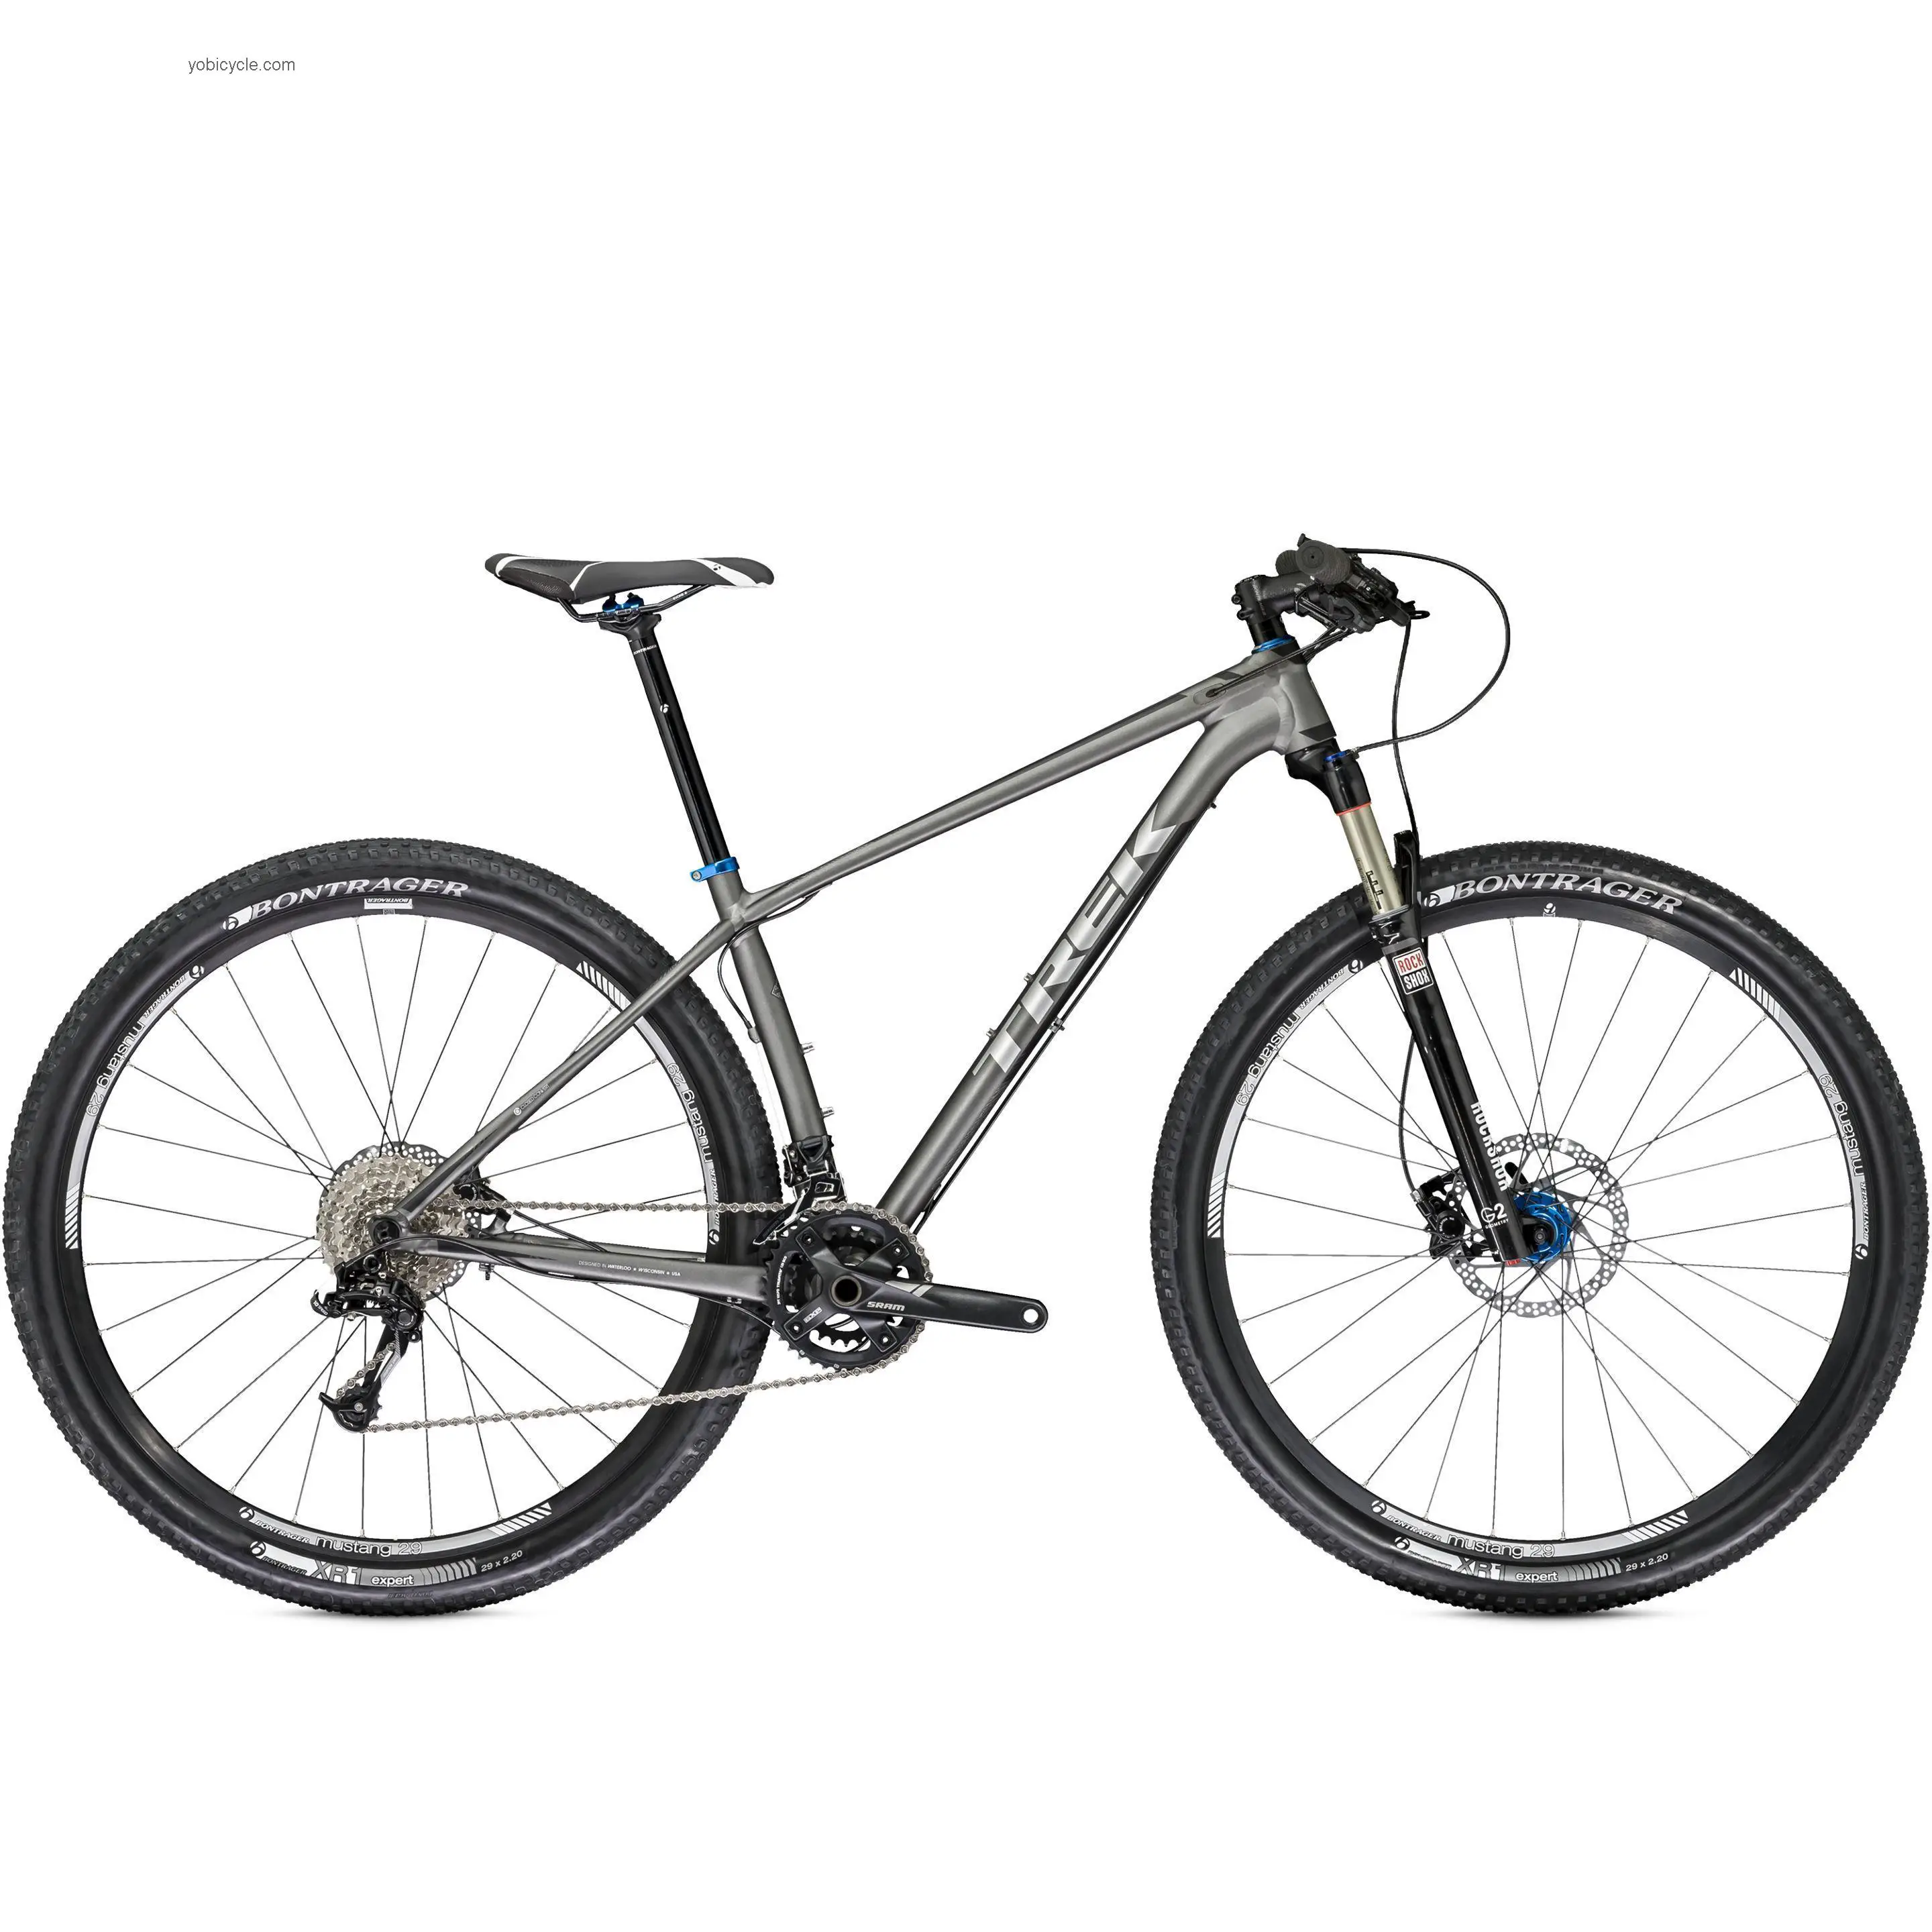 Trek Superfly 6 2014 comparison online with competitors